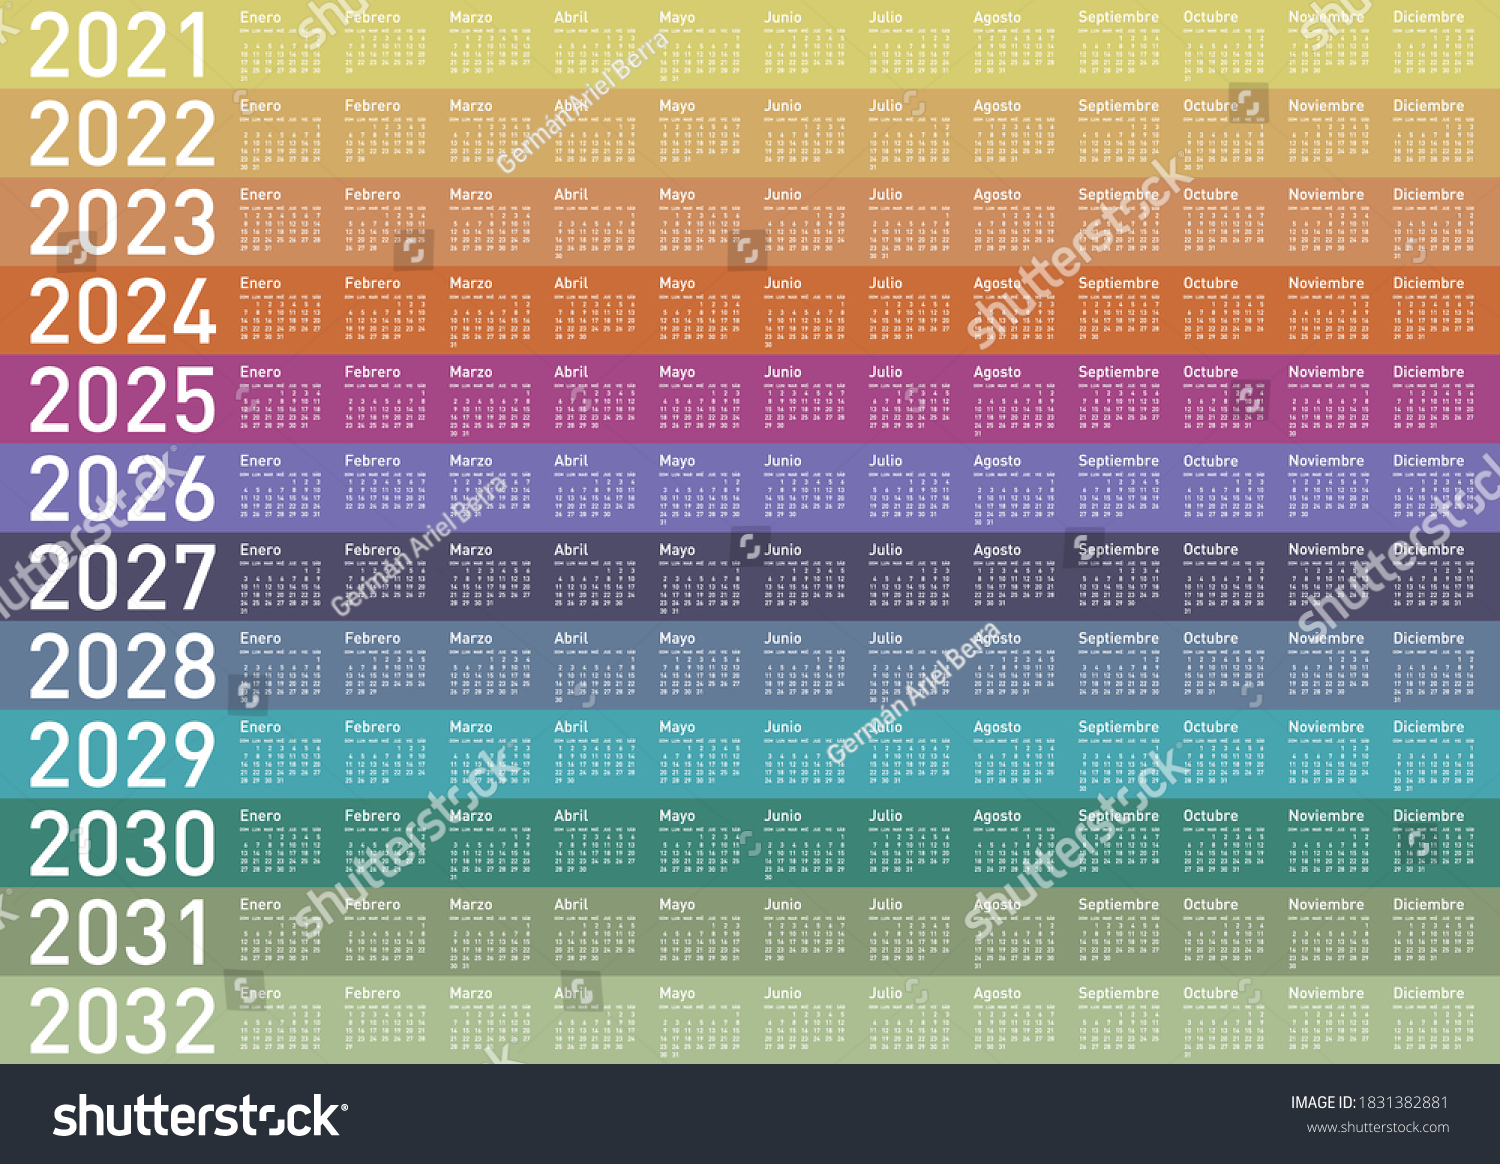 Colorful Calendar For Years 2021 2022 2023 Royalty Free Stock